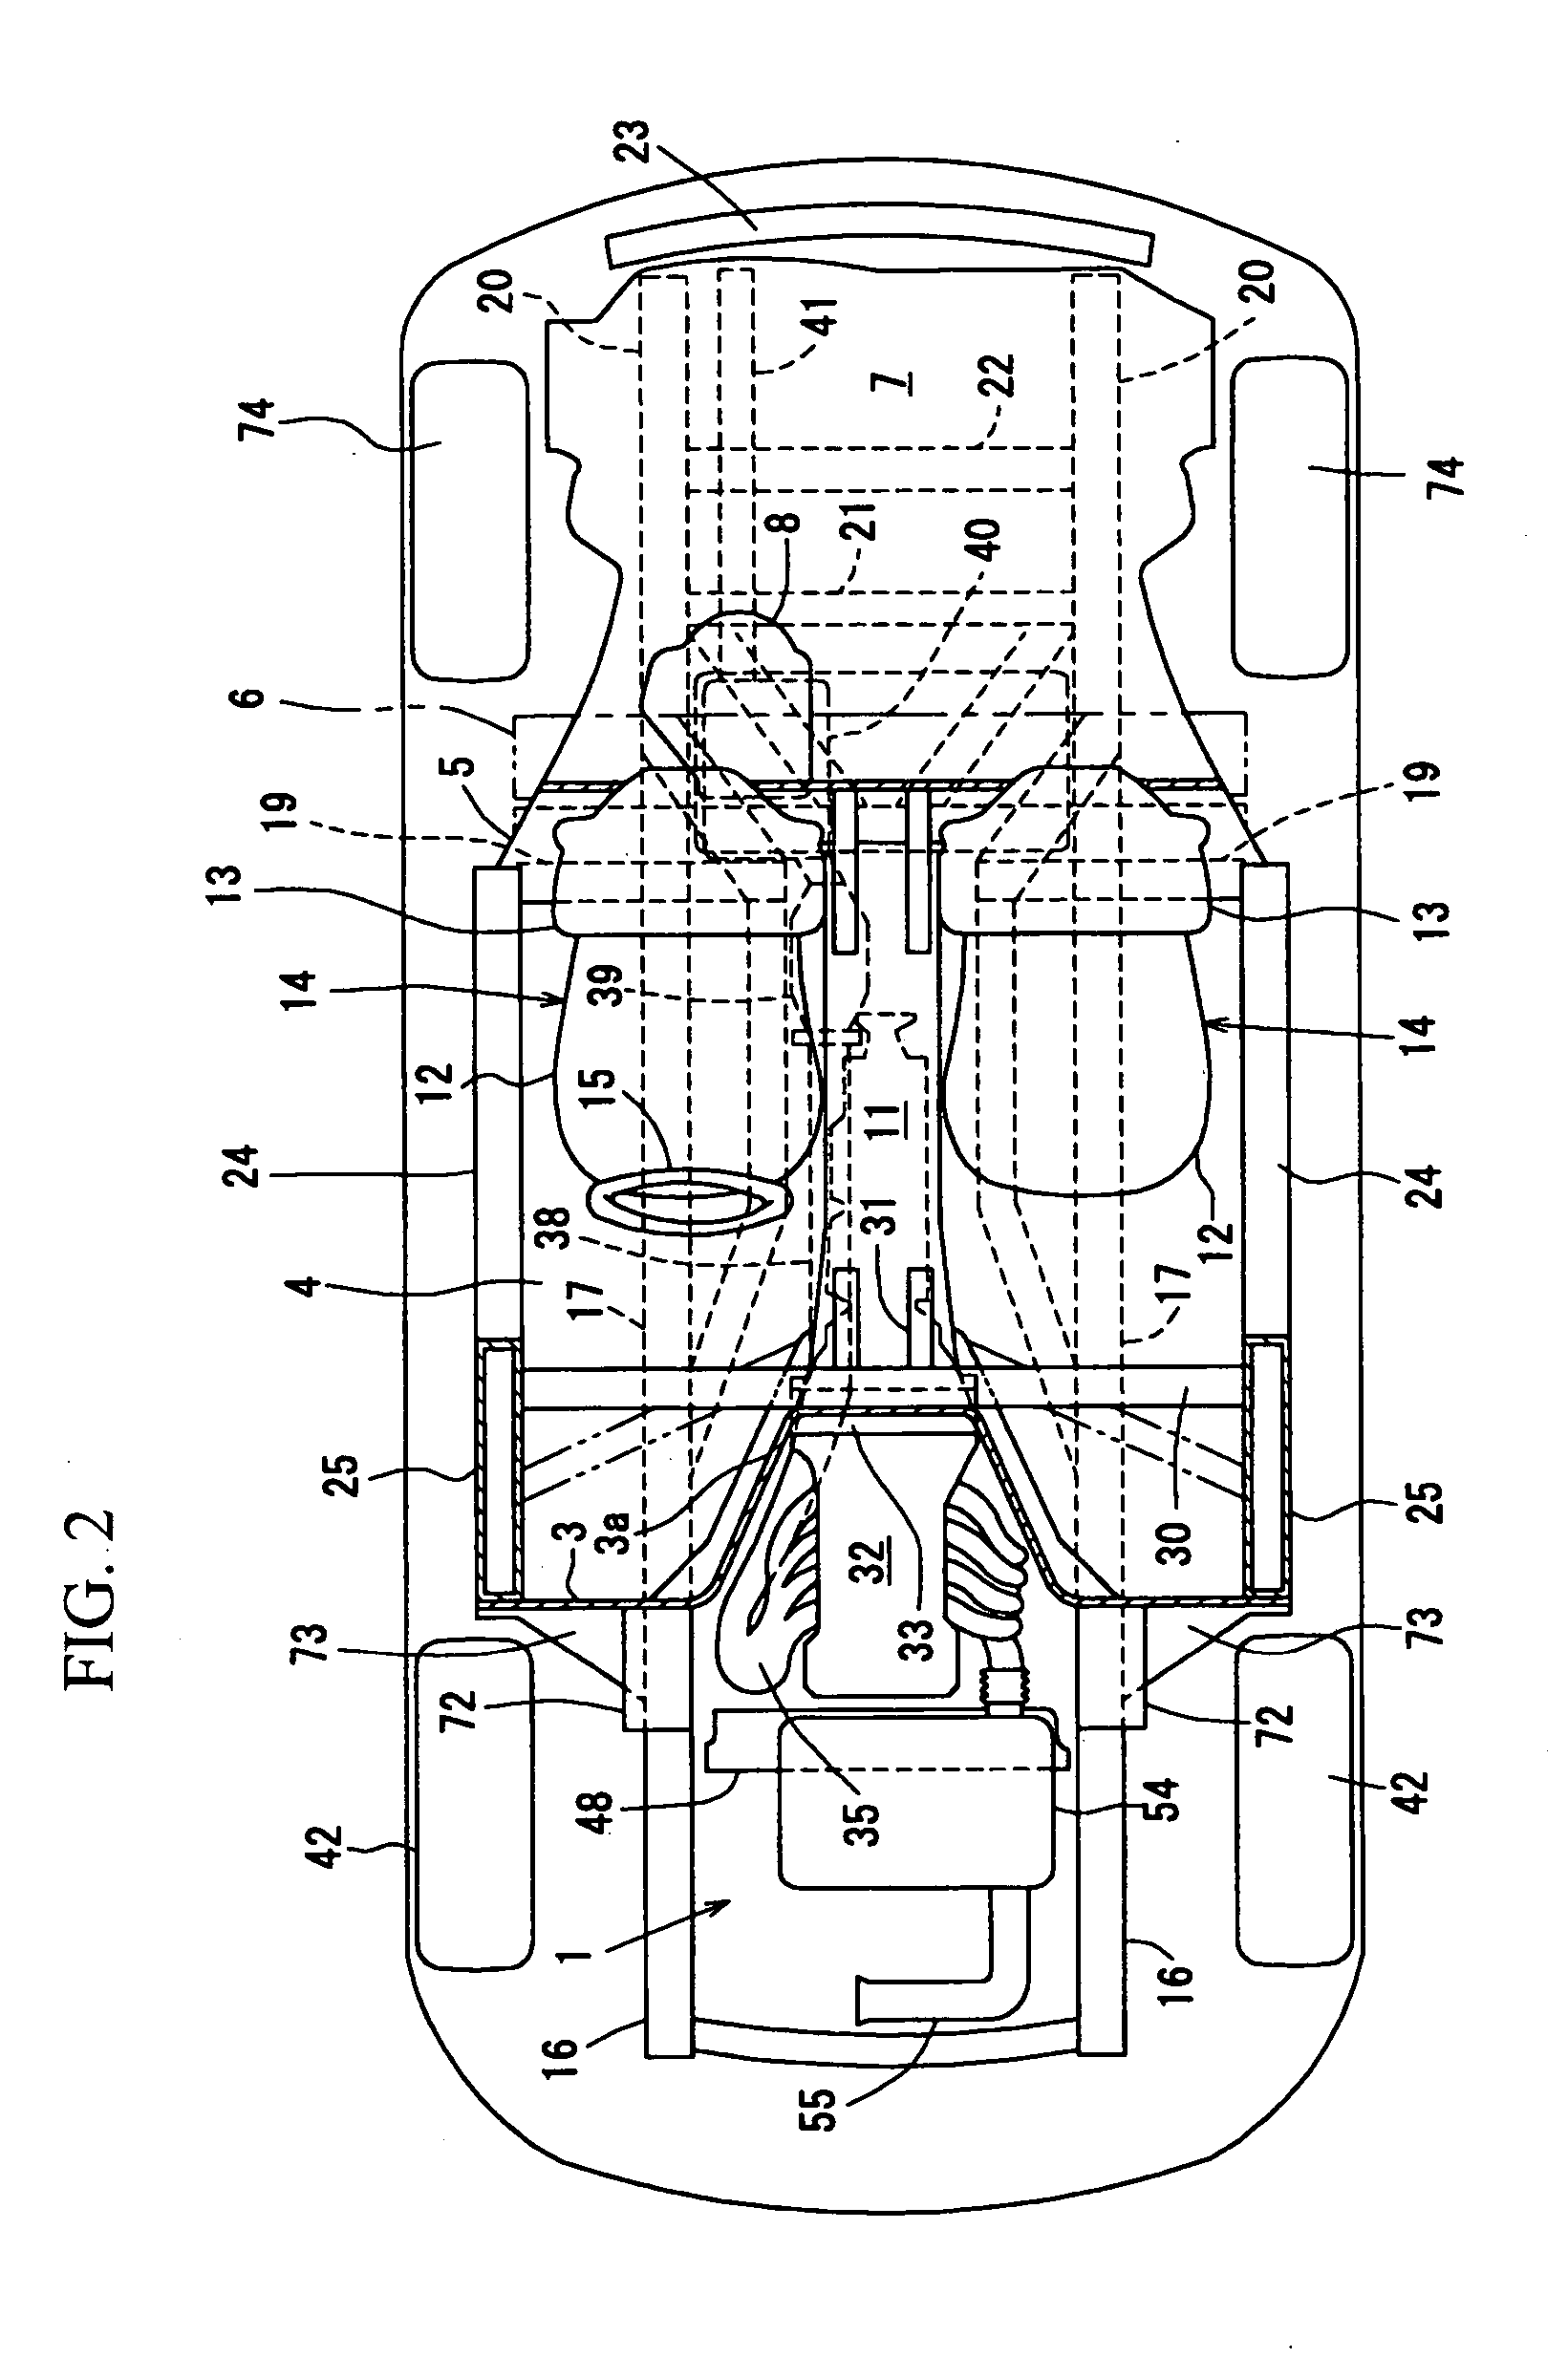 Layout structure of driving device for vehicle